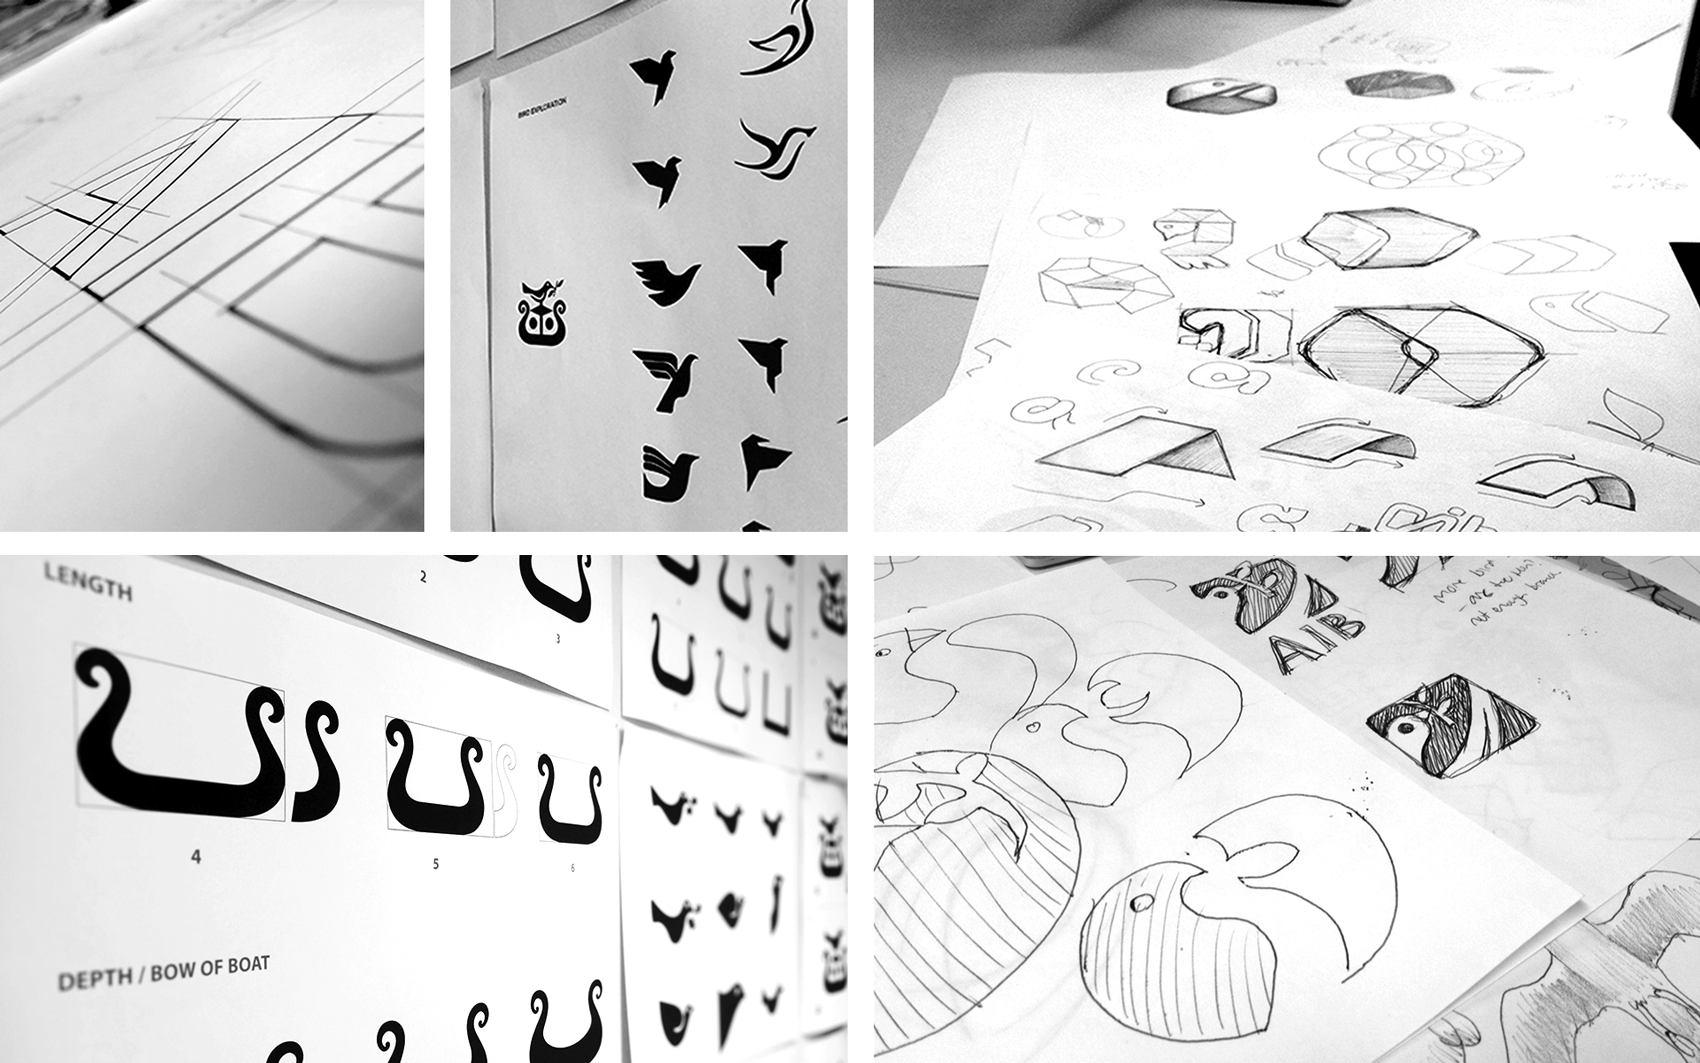 Brand board for mockup concepts while designing the AIB emblem